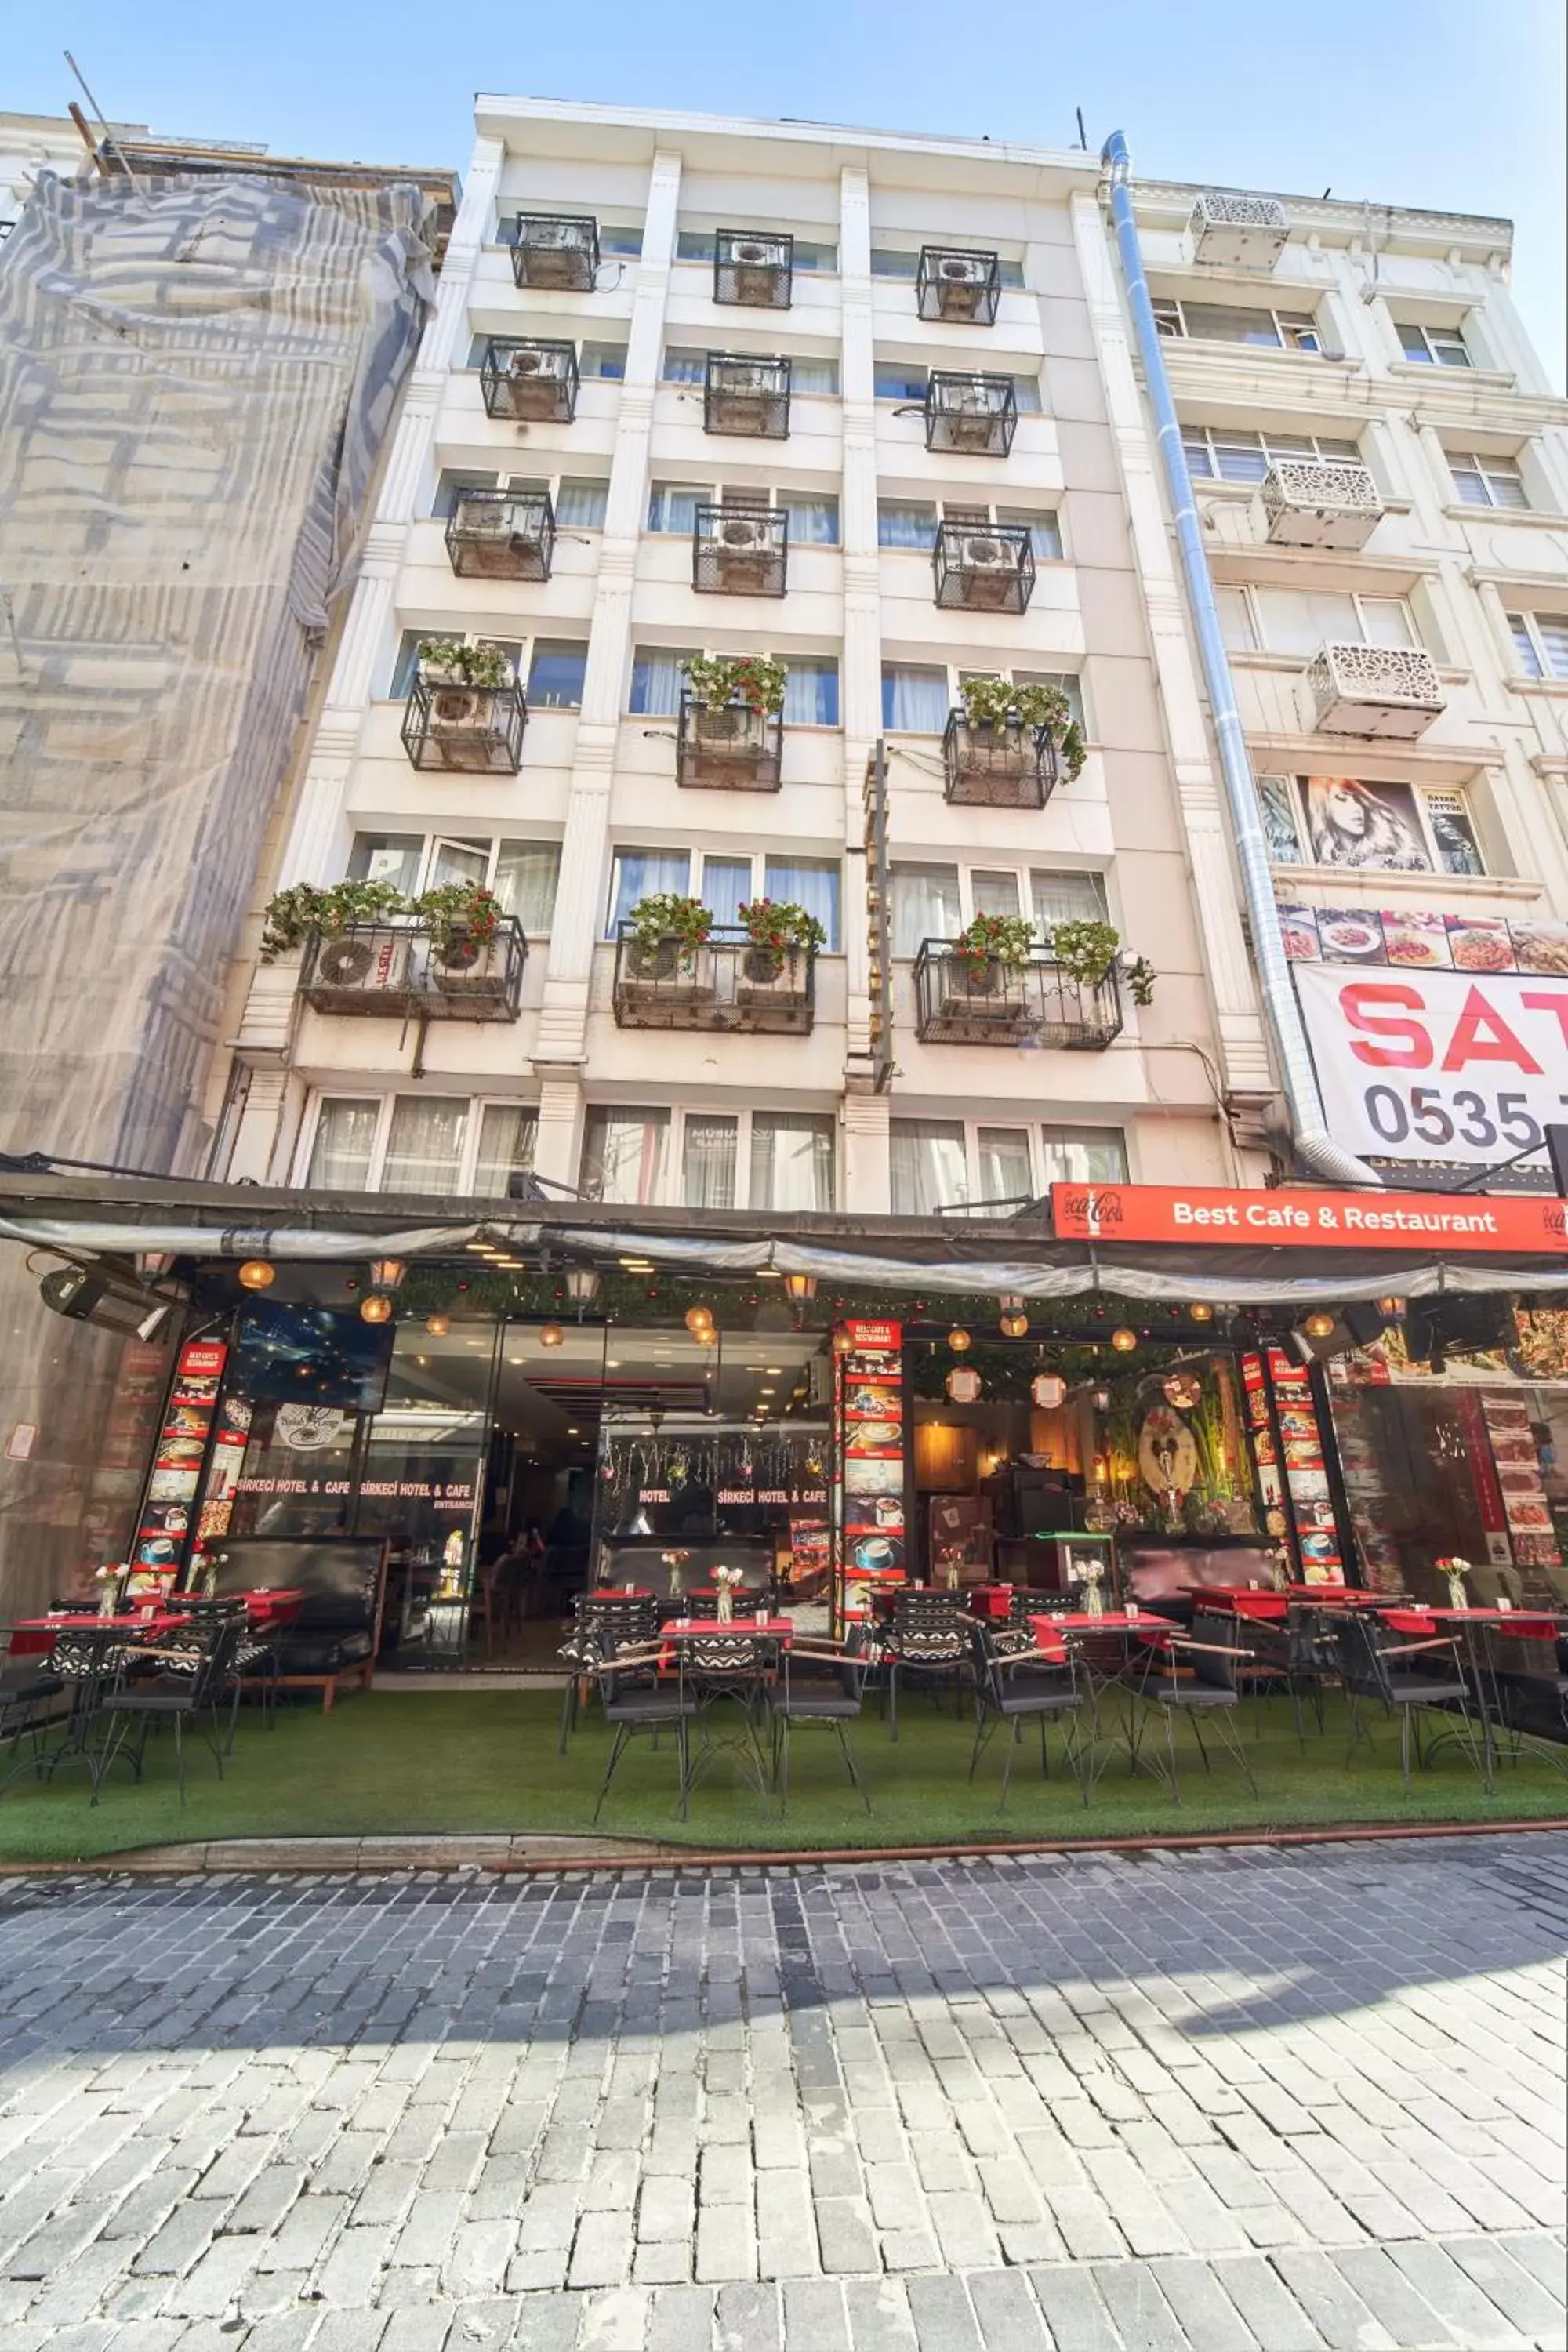 Property Building in Istanbul Sirkeci Hotel